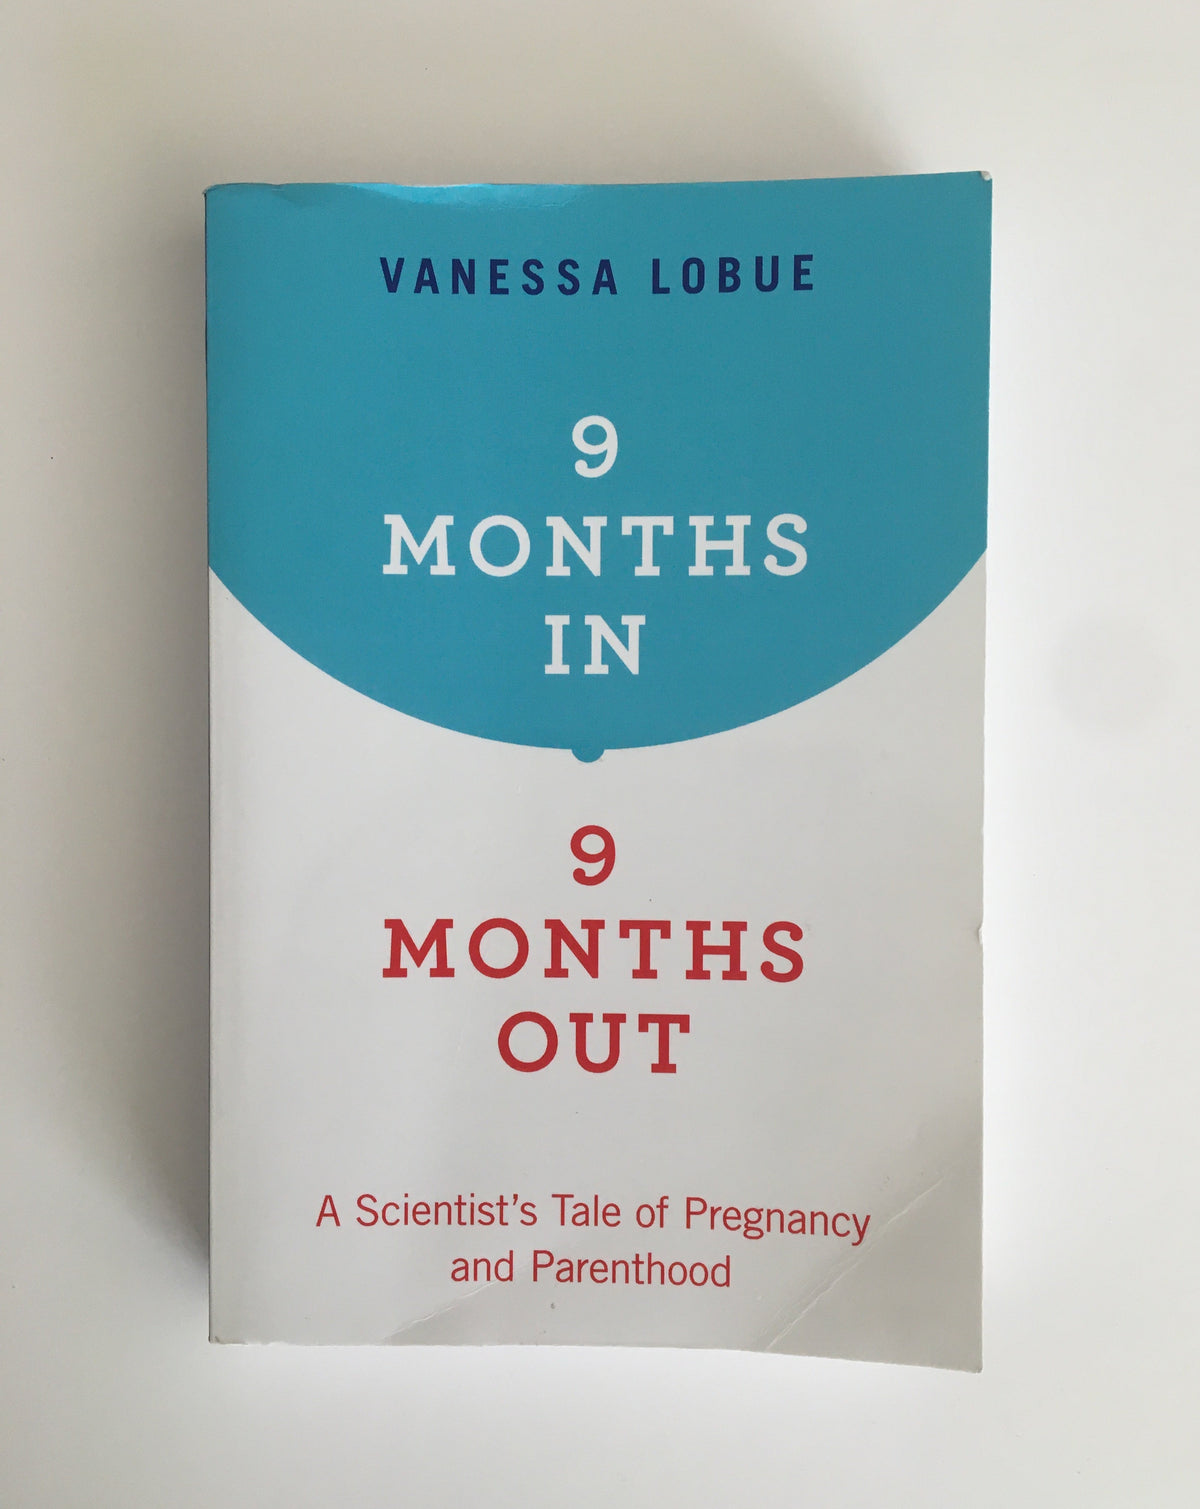 9 Months in 9 Months Out: A Scientist&#39;s Tale of Pregnancy and Parenthood by Vanessa Lobou